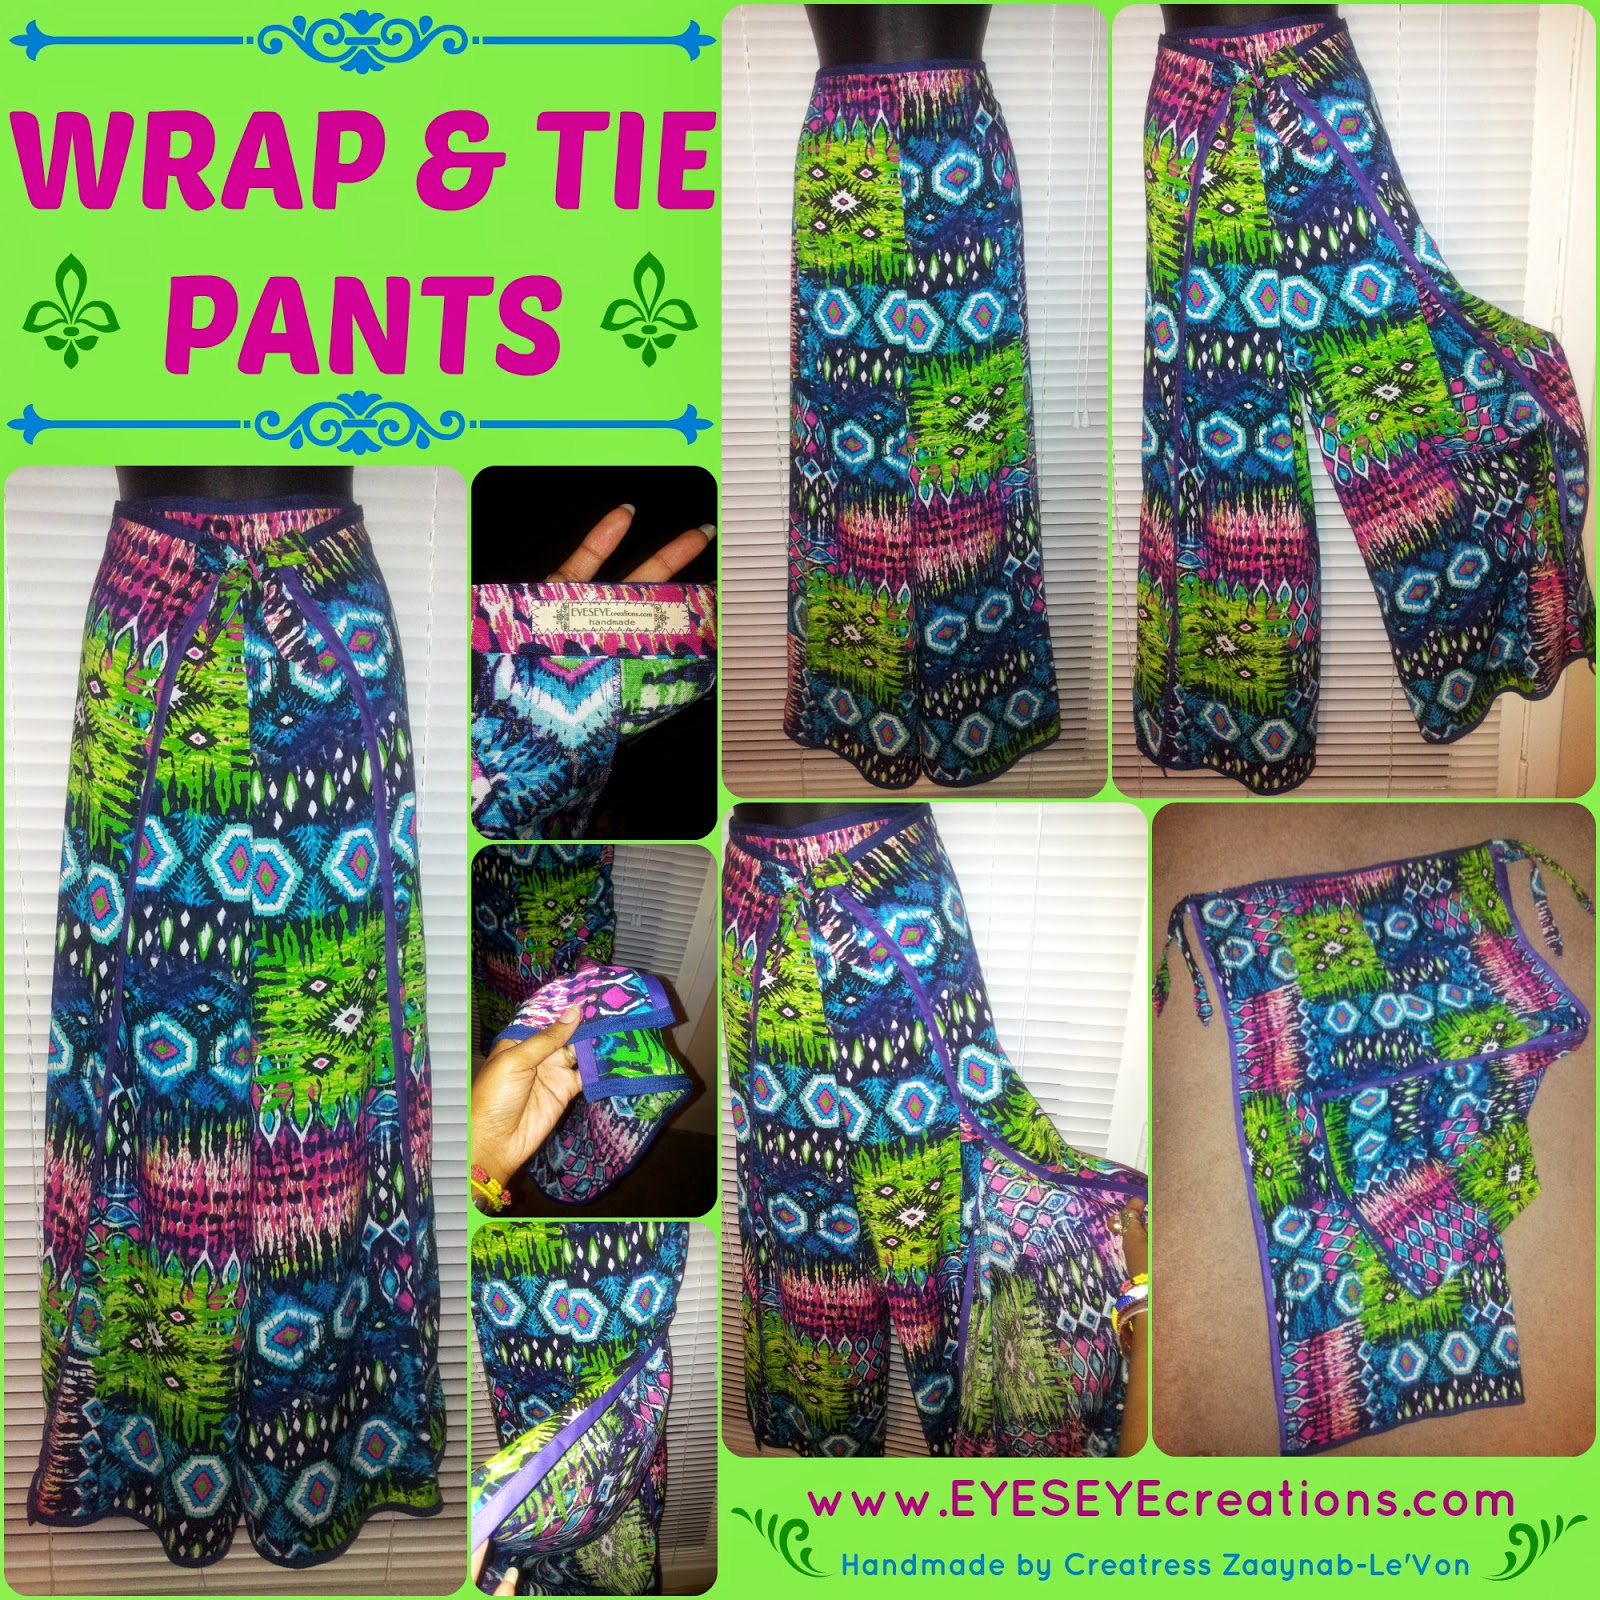 WRAP & TIE PANTS - The Psychedelics - EYESEYE creations